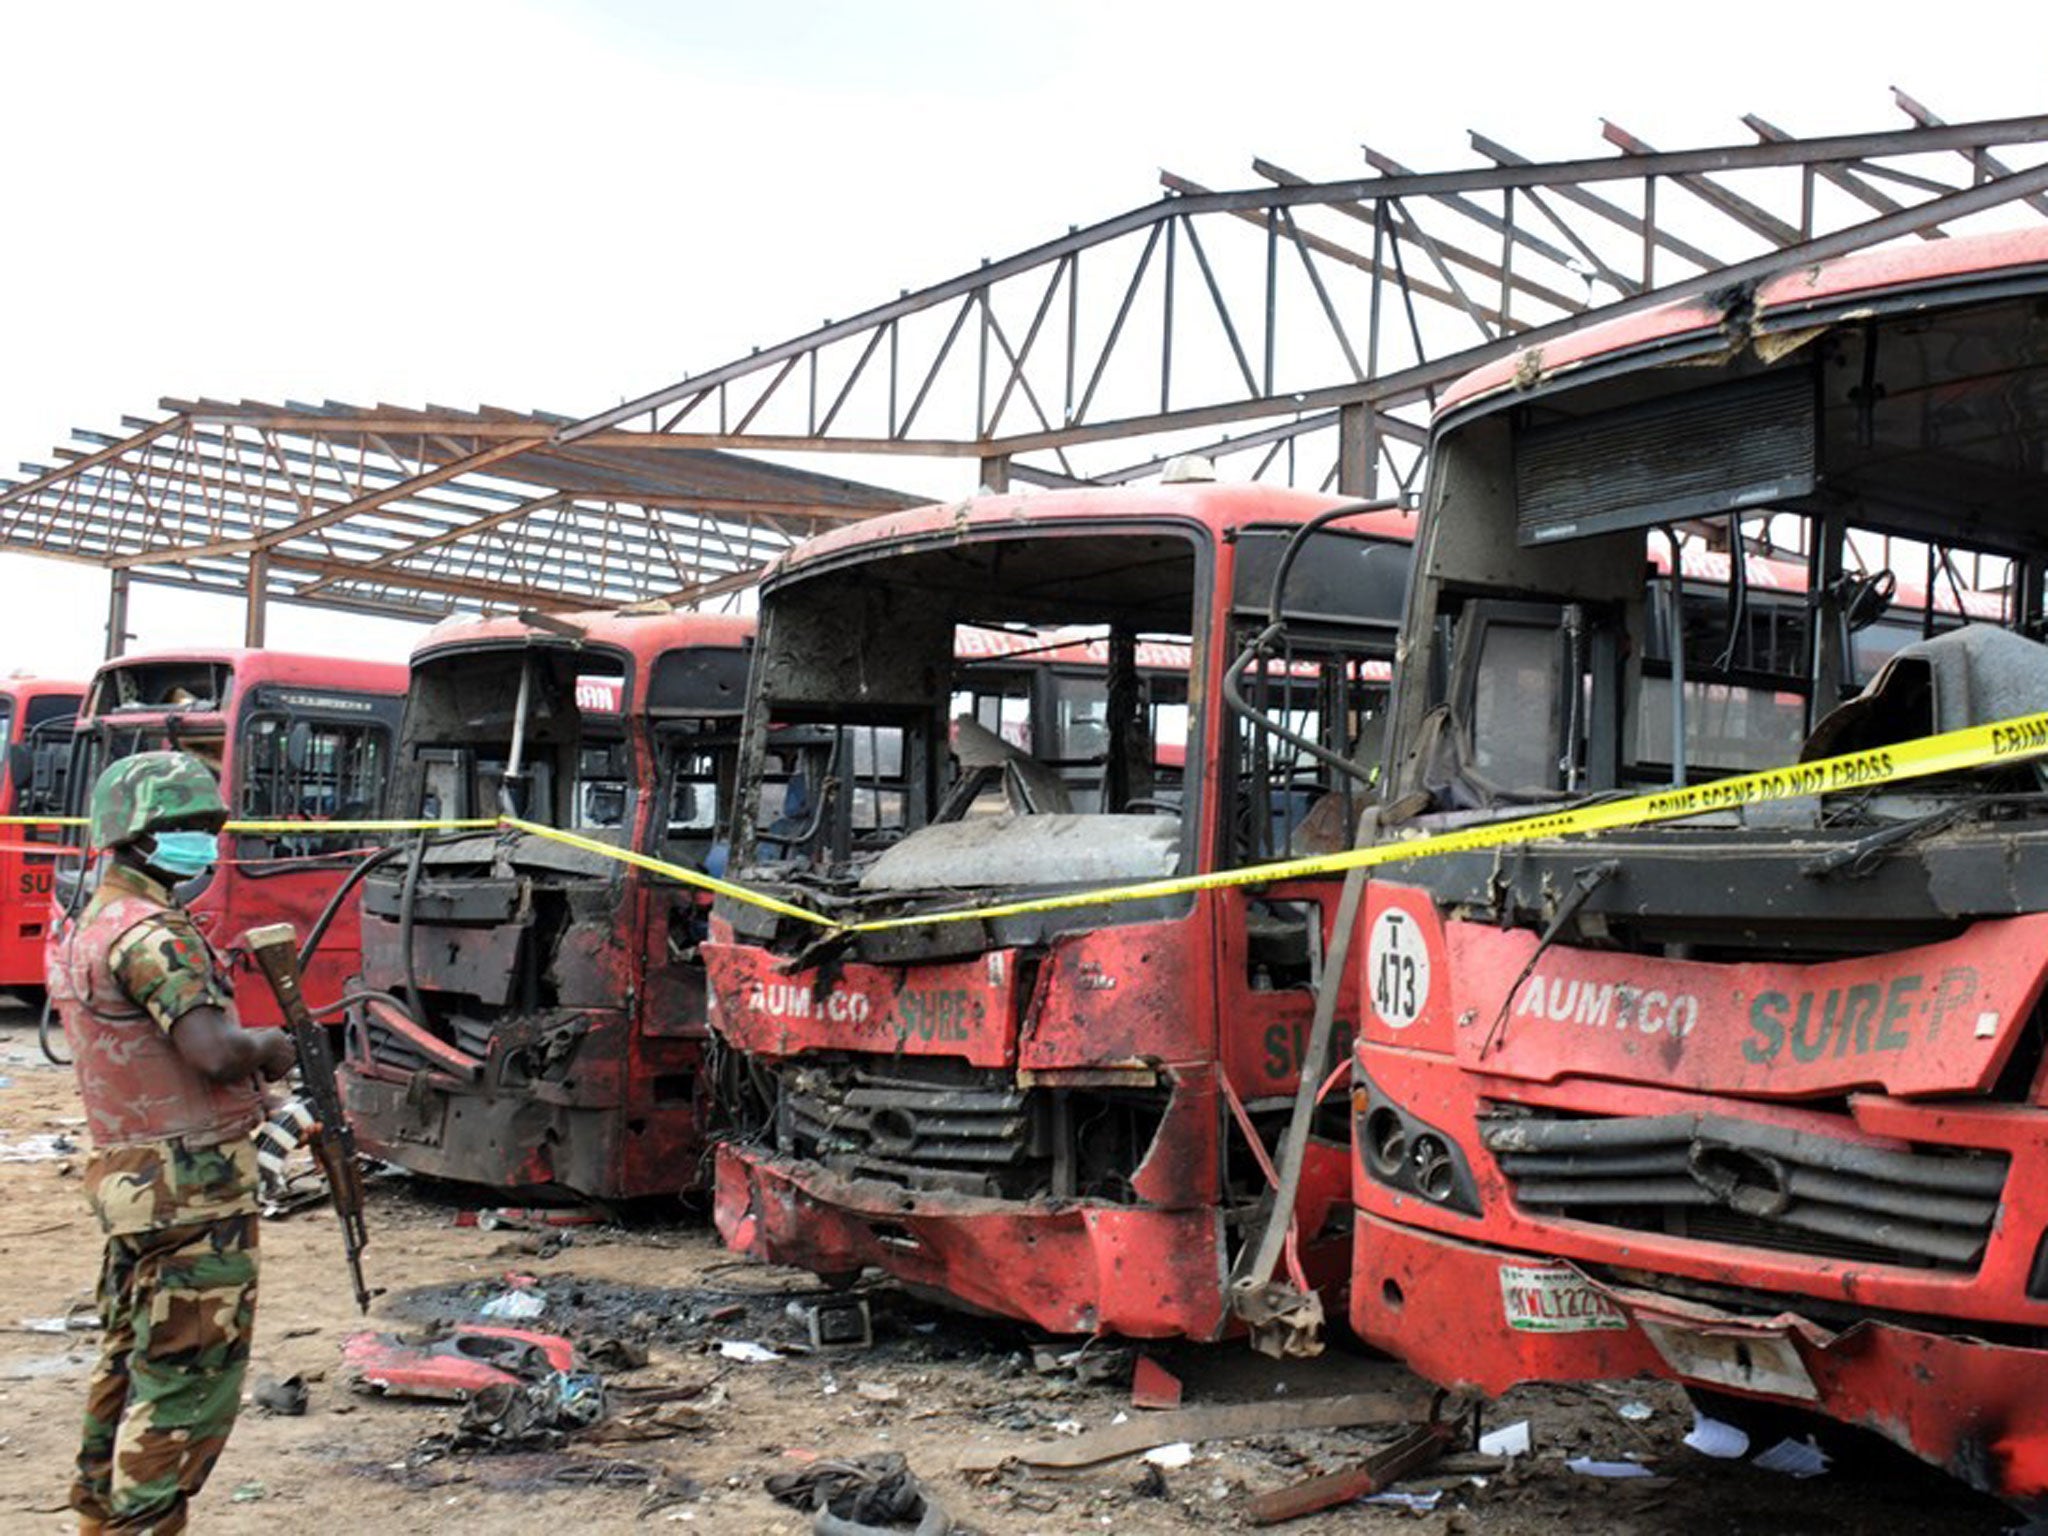 A soldier stands guard in front of burnt buses after an attack in Abuja. Twin blasts at a bus station packed with morning commuters on the outskirts of Nigeria's capital killed dozens of people, in what appeared to be the latest attack by Boko Haram Islam